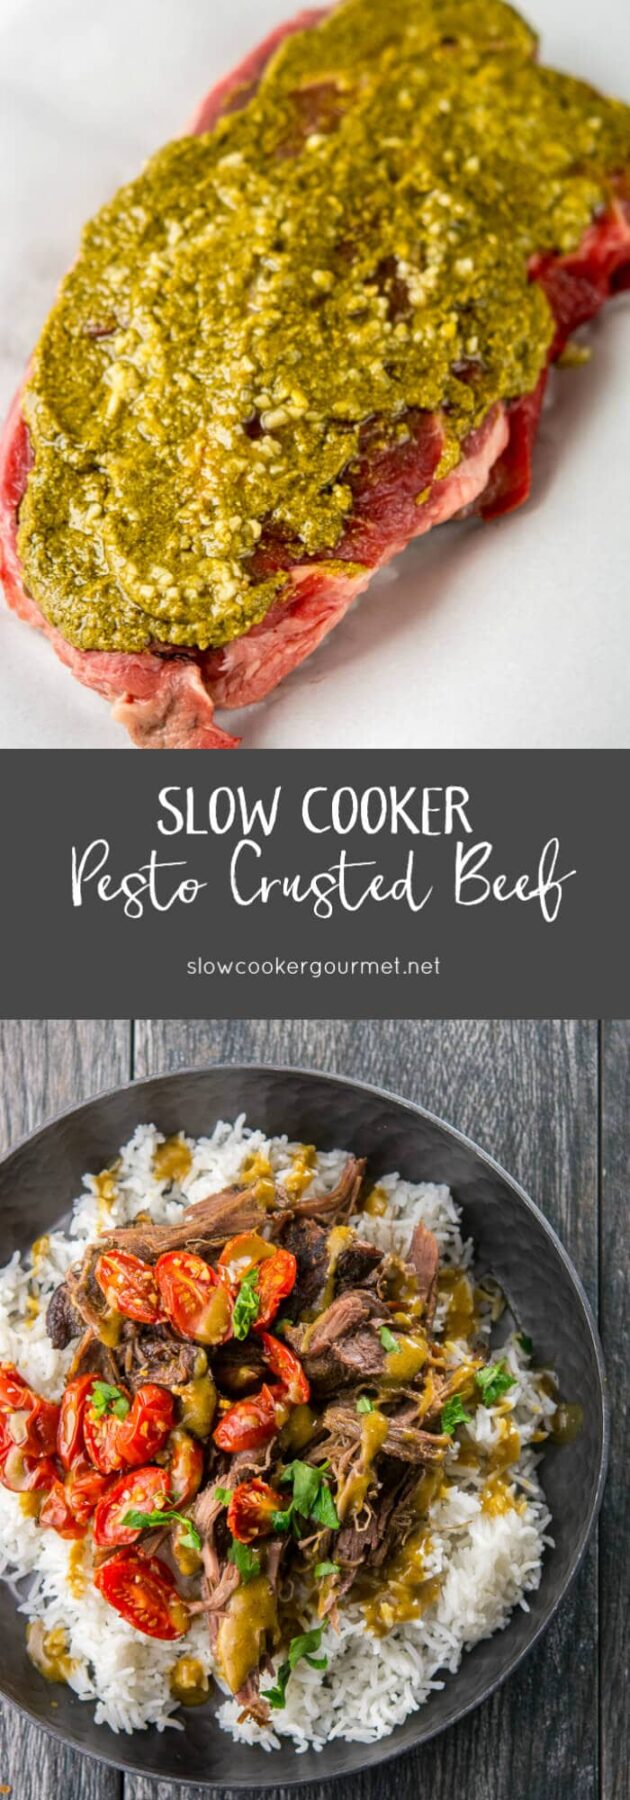 Slow Cooker Pesto Crusted Beef